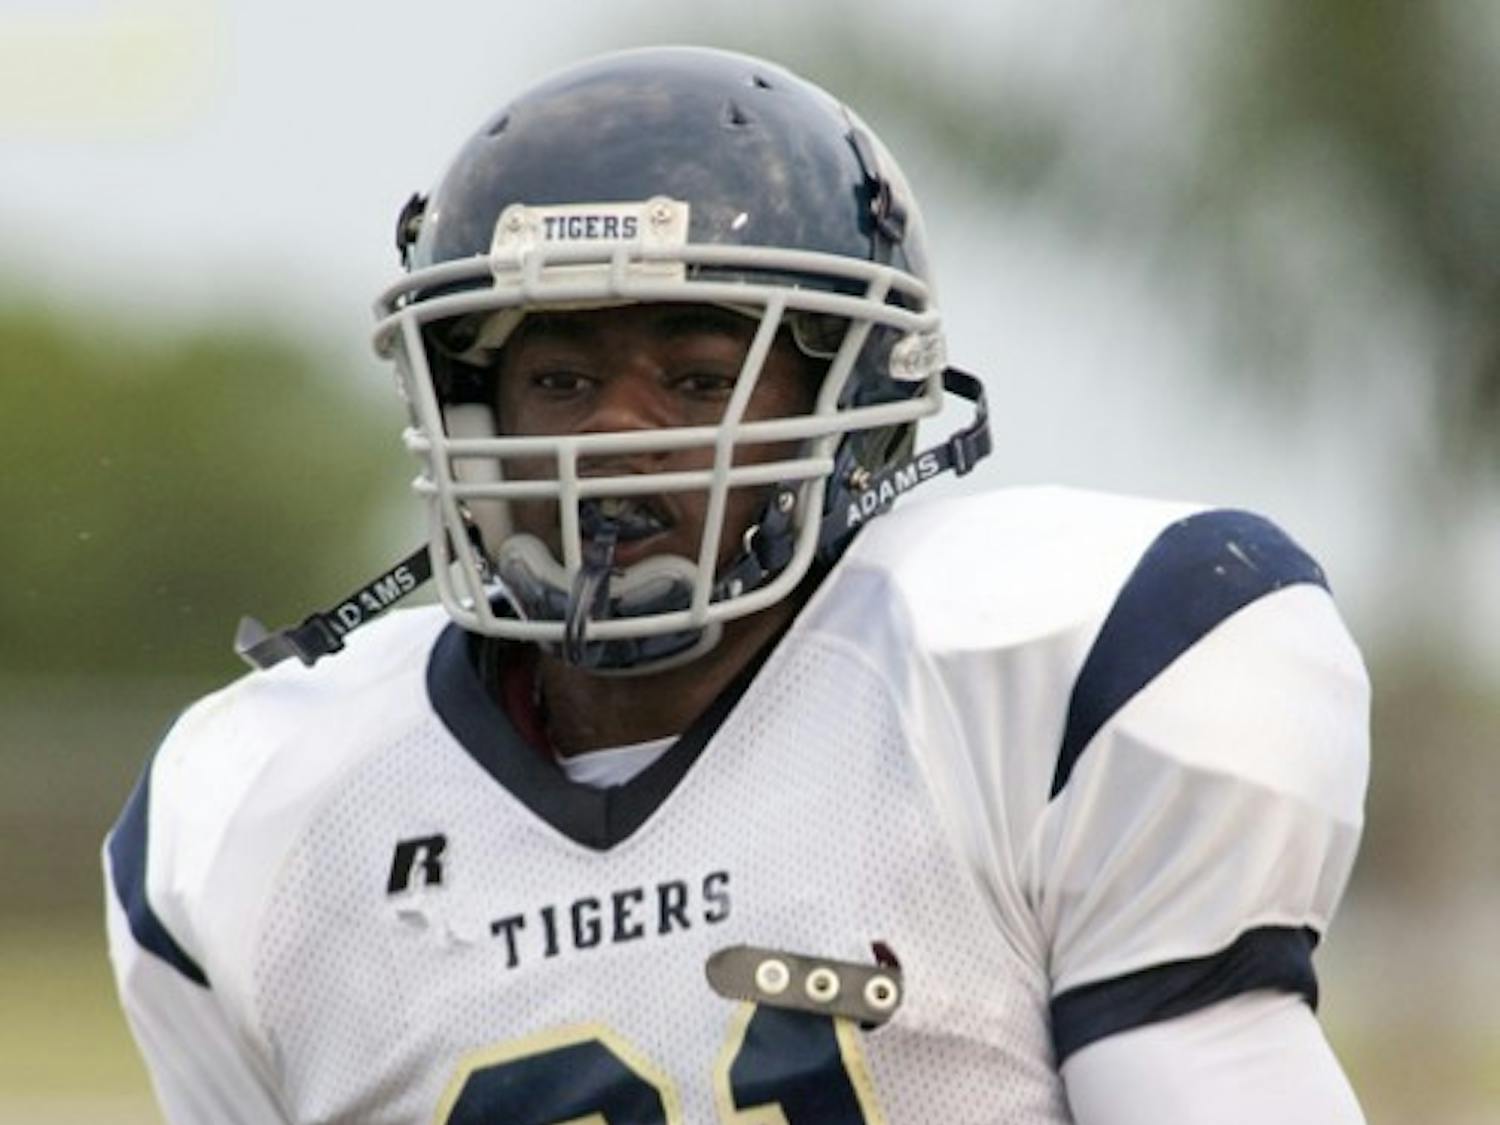 On Monday, Melbourne Holy Trinity free safety Marcus Maye became Florida’s 15th oral commitment for its 2012 class.